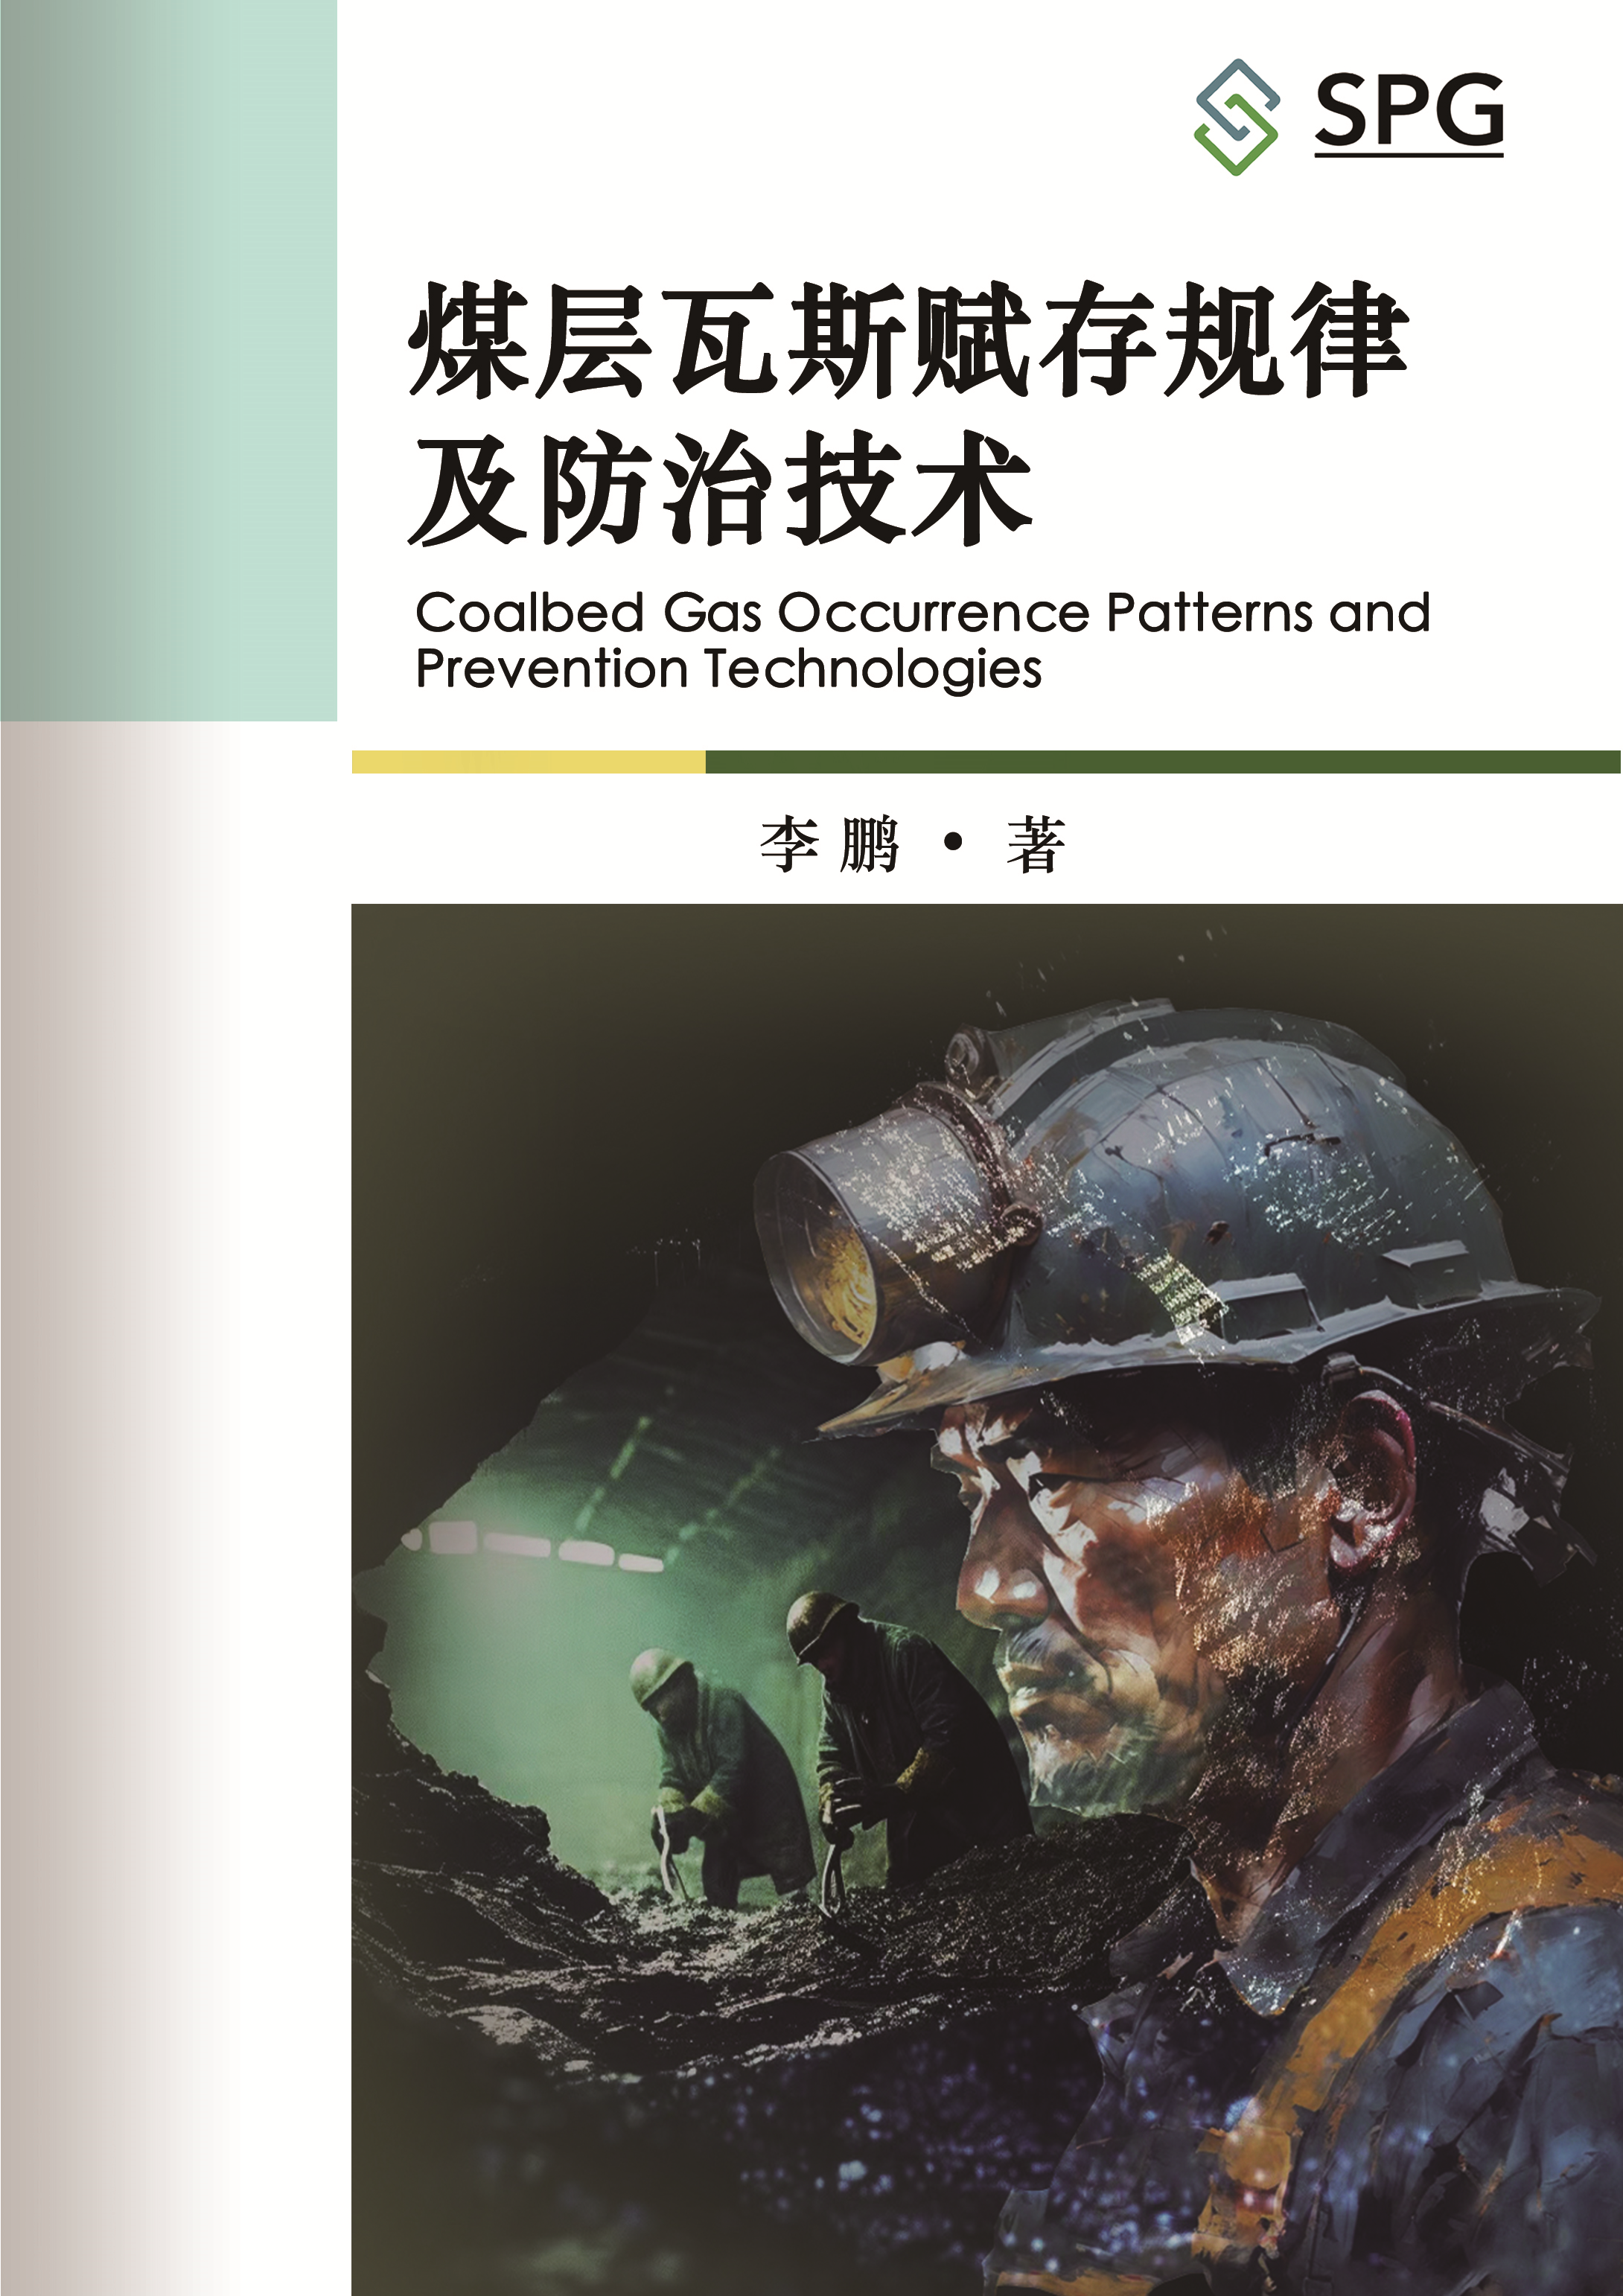 Coalbed Gas Occurrence Patterns and Prevention Technologies | Scholar Publishing Group